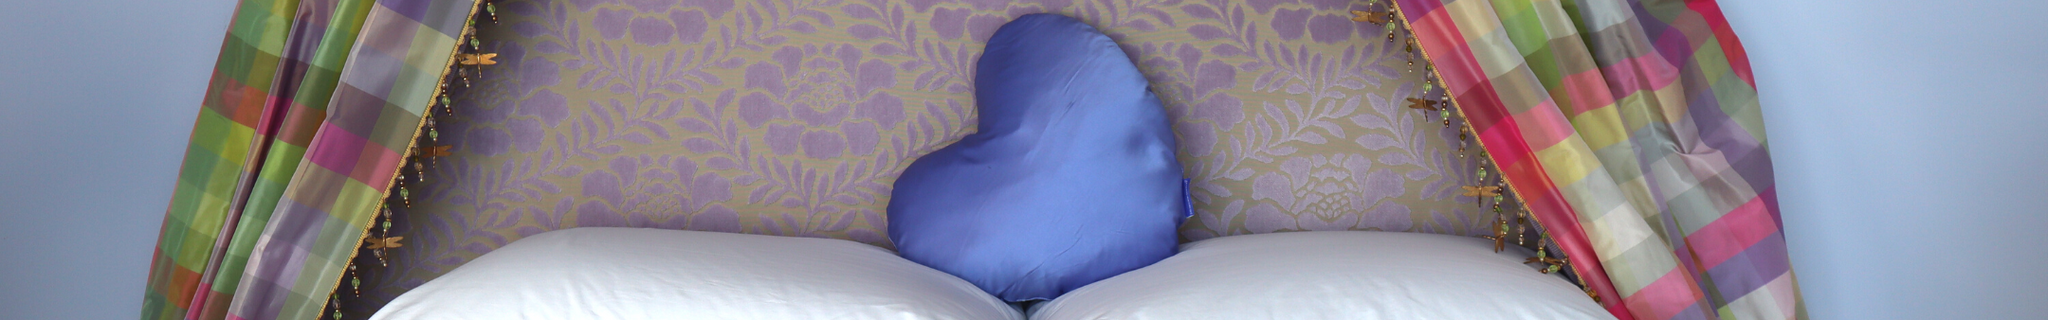 Periwinkle Heart Pillow on bed